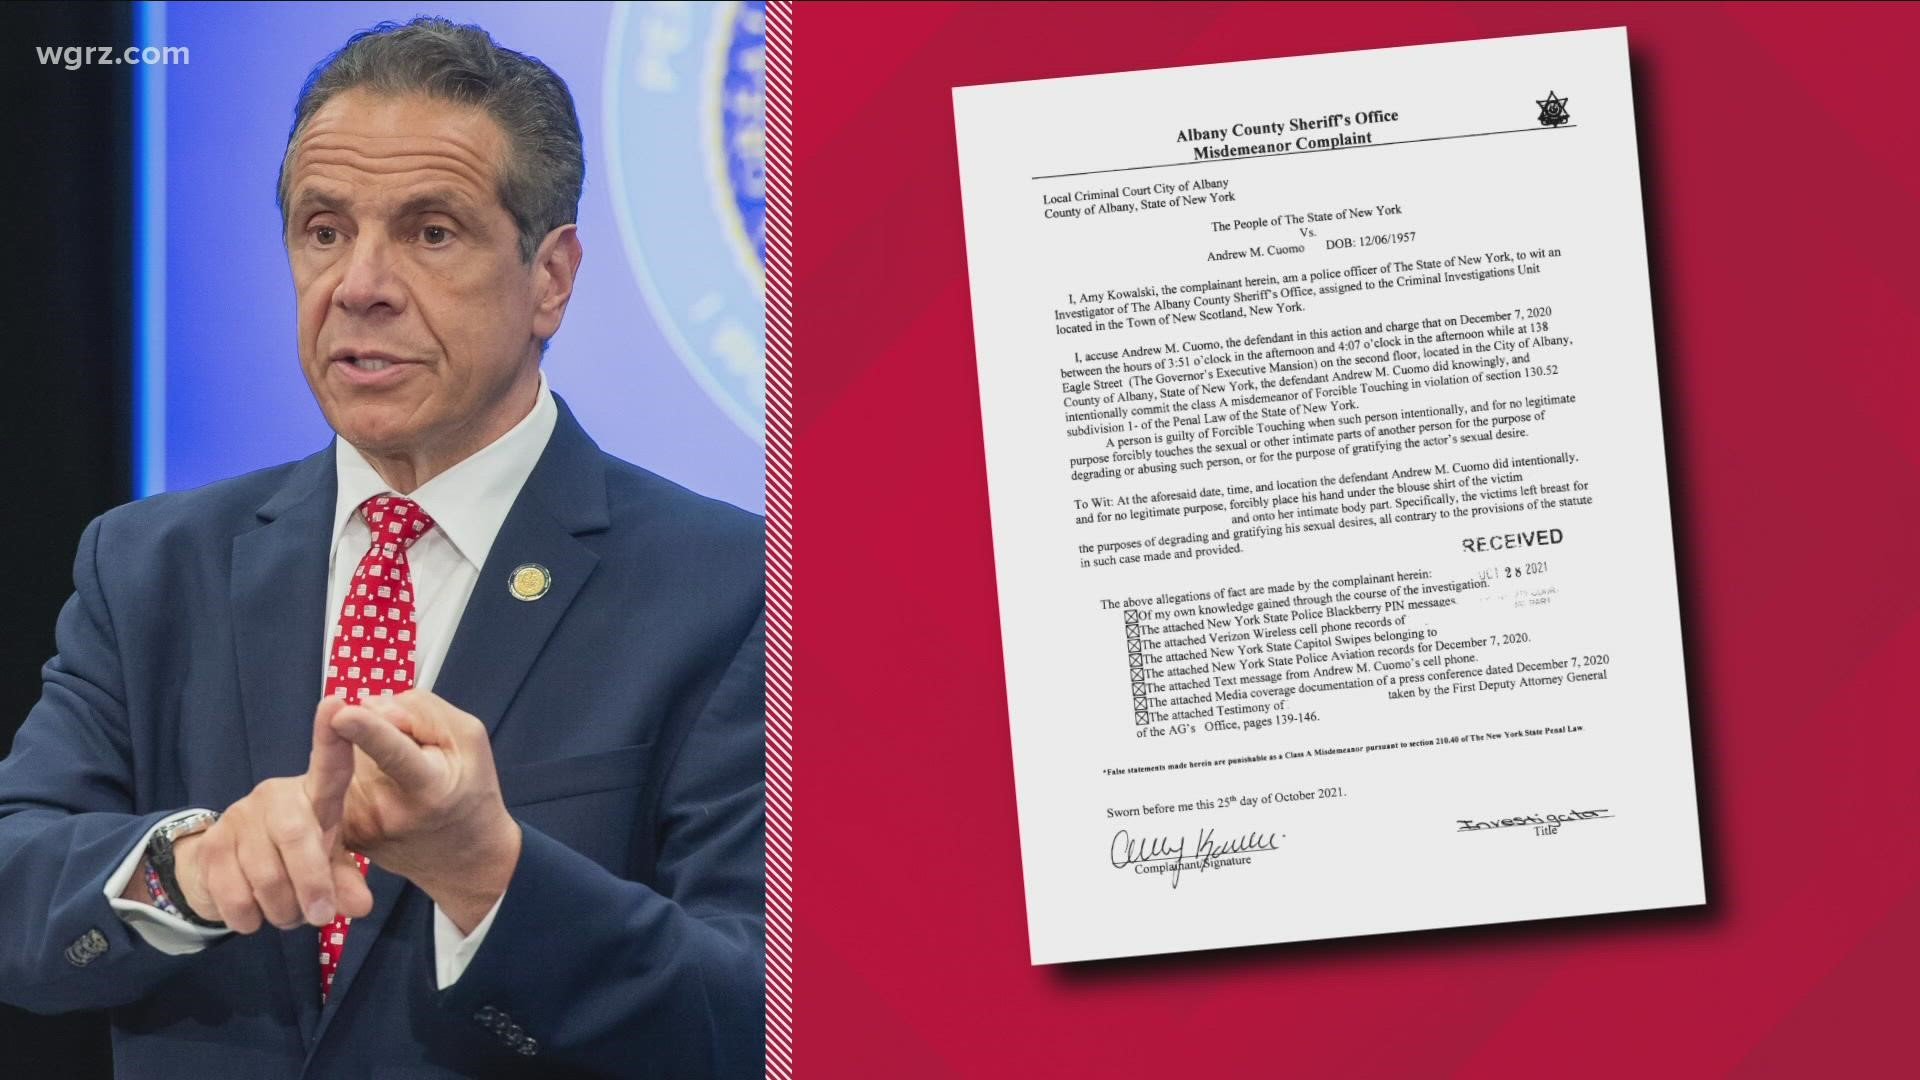 The prosecutor investigating a groping allegation against former Governor Andrew Cuomo, is asking for more time to review evidence before heading to court.